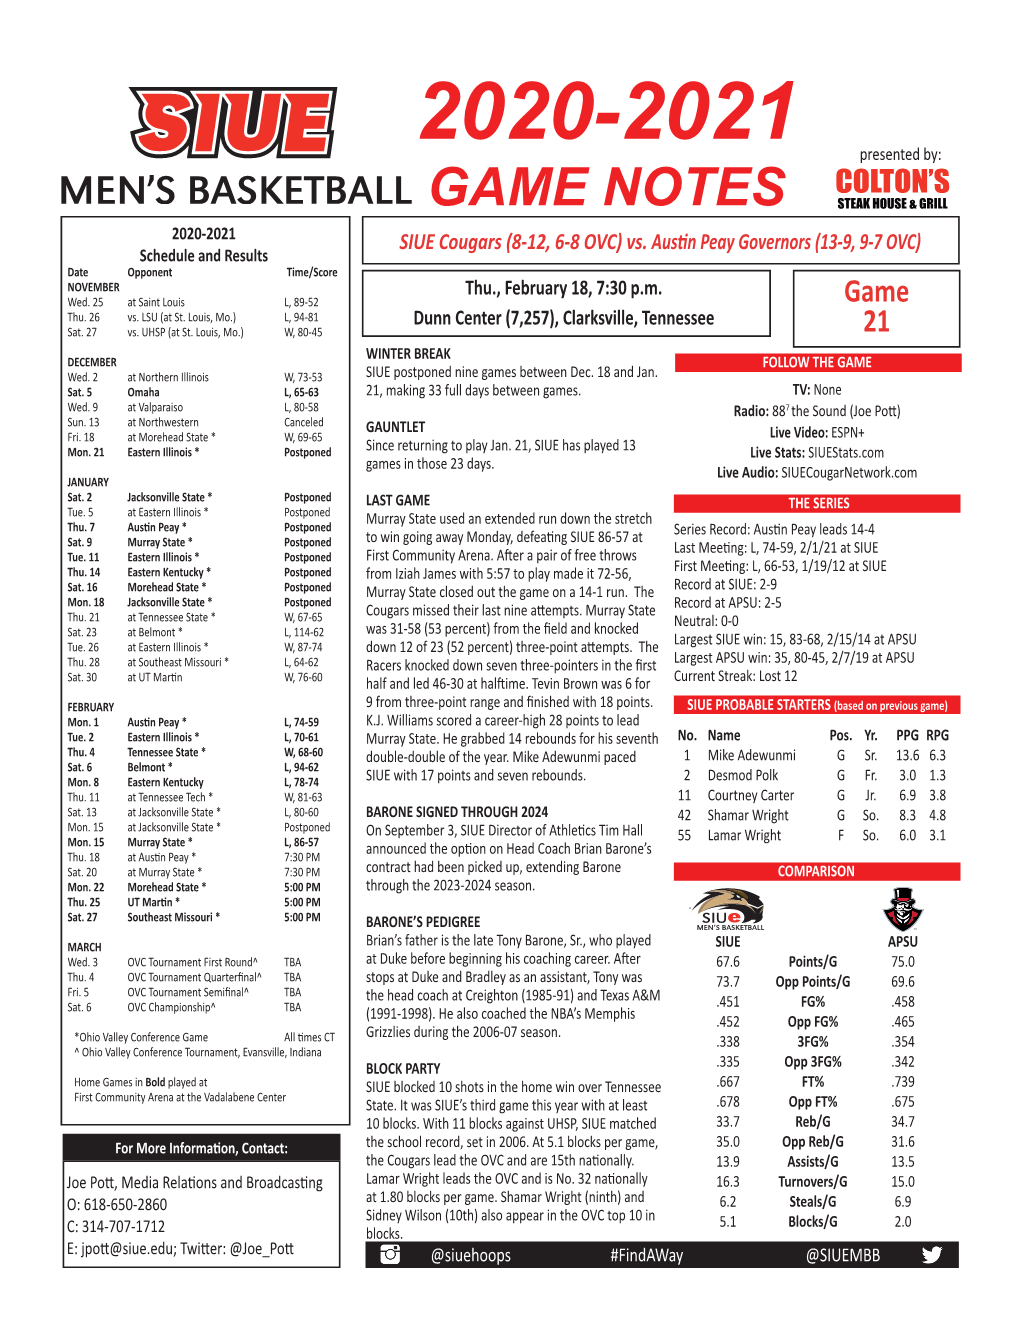 GAME NOTES STEAK HOUSE & GRILL 2020-2021 SIUE Cougars (8-12, 6-8 OVC) Vs